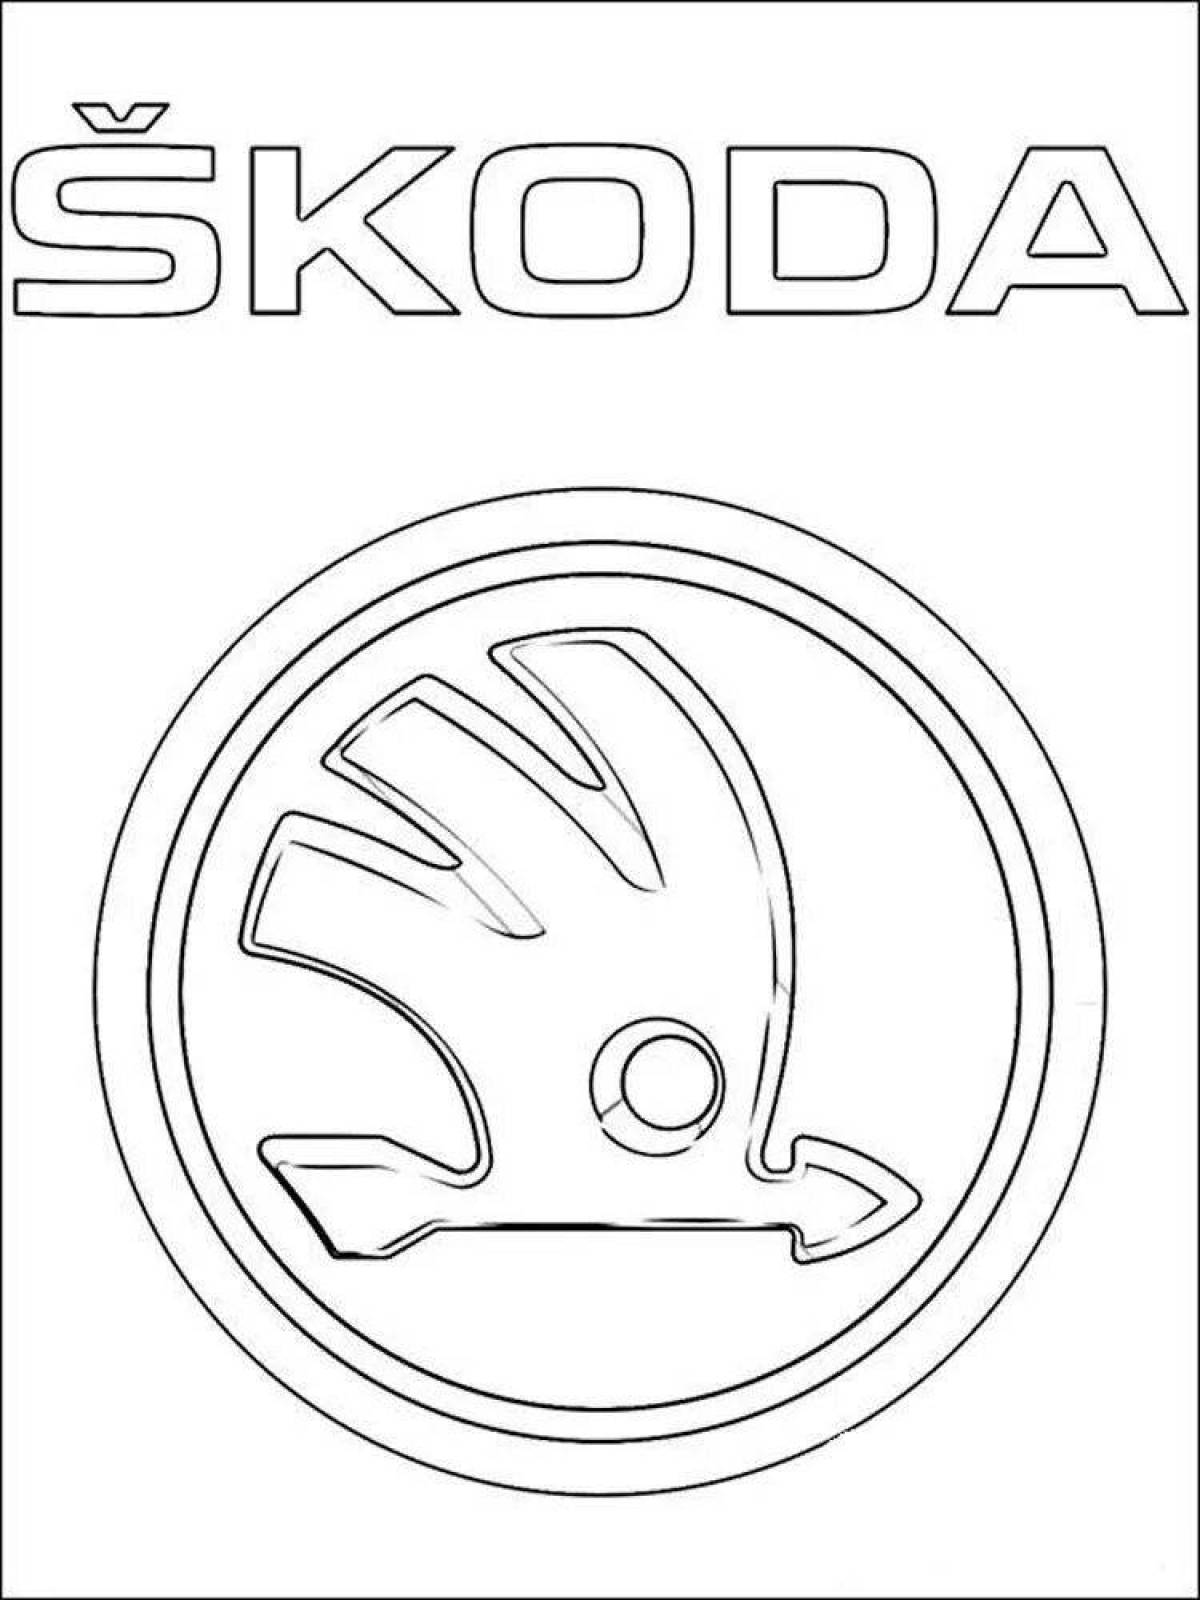 Majestic car logo coloring page